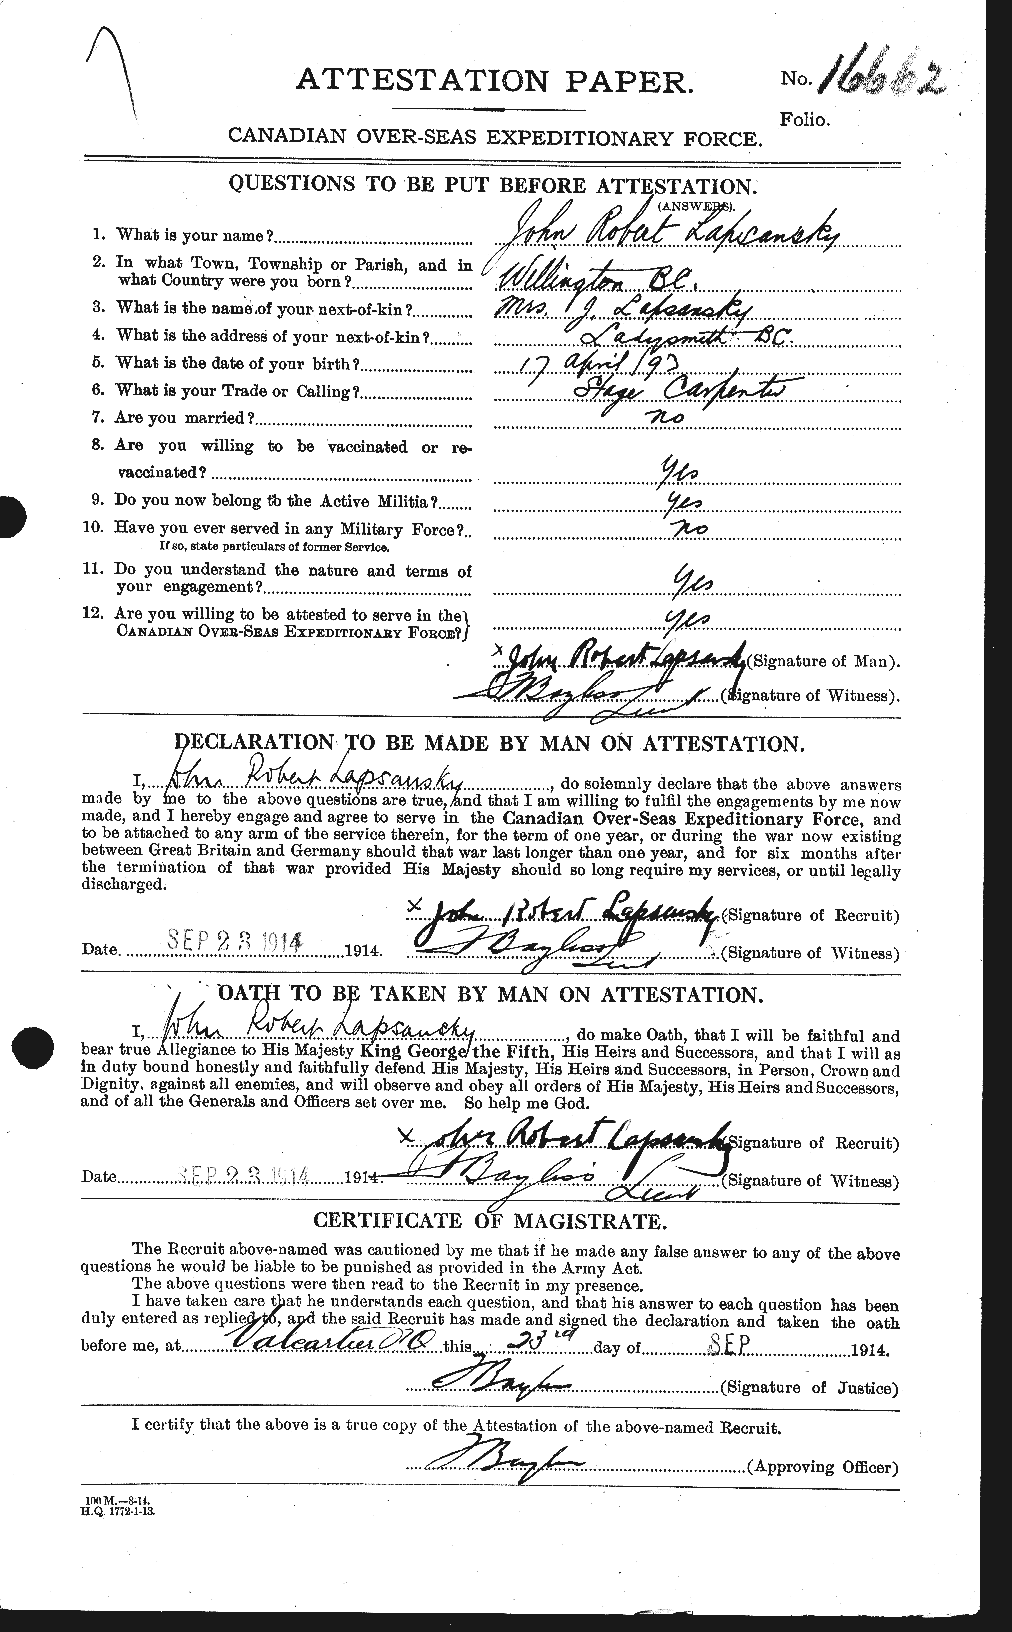 Personnel Records of the First World War - CEF 449137a